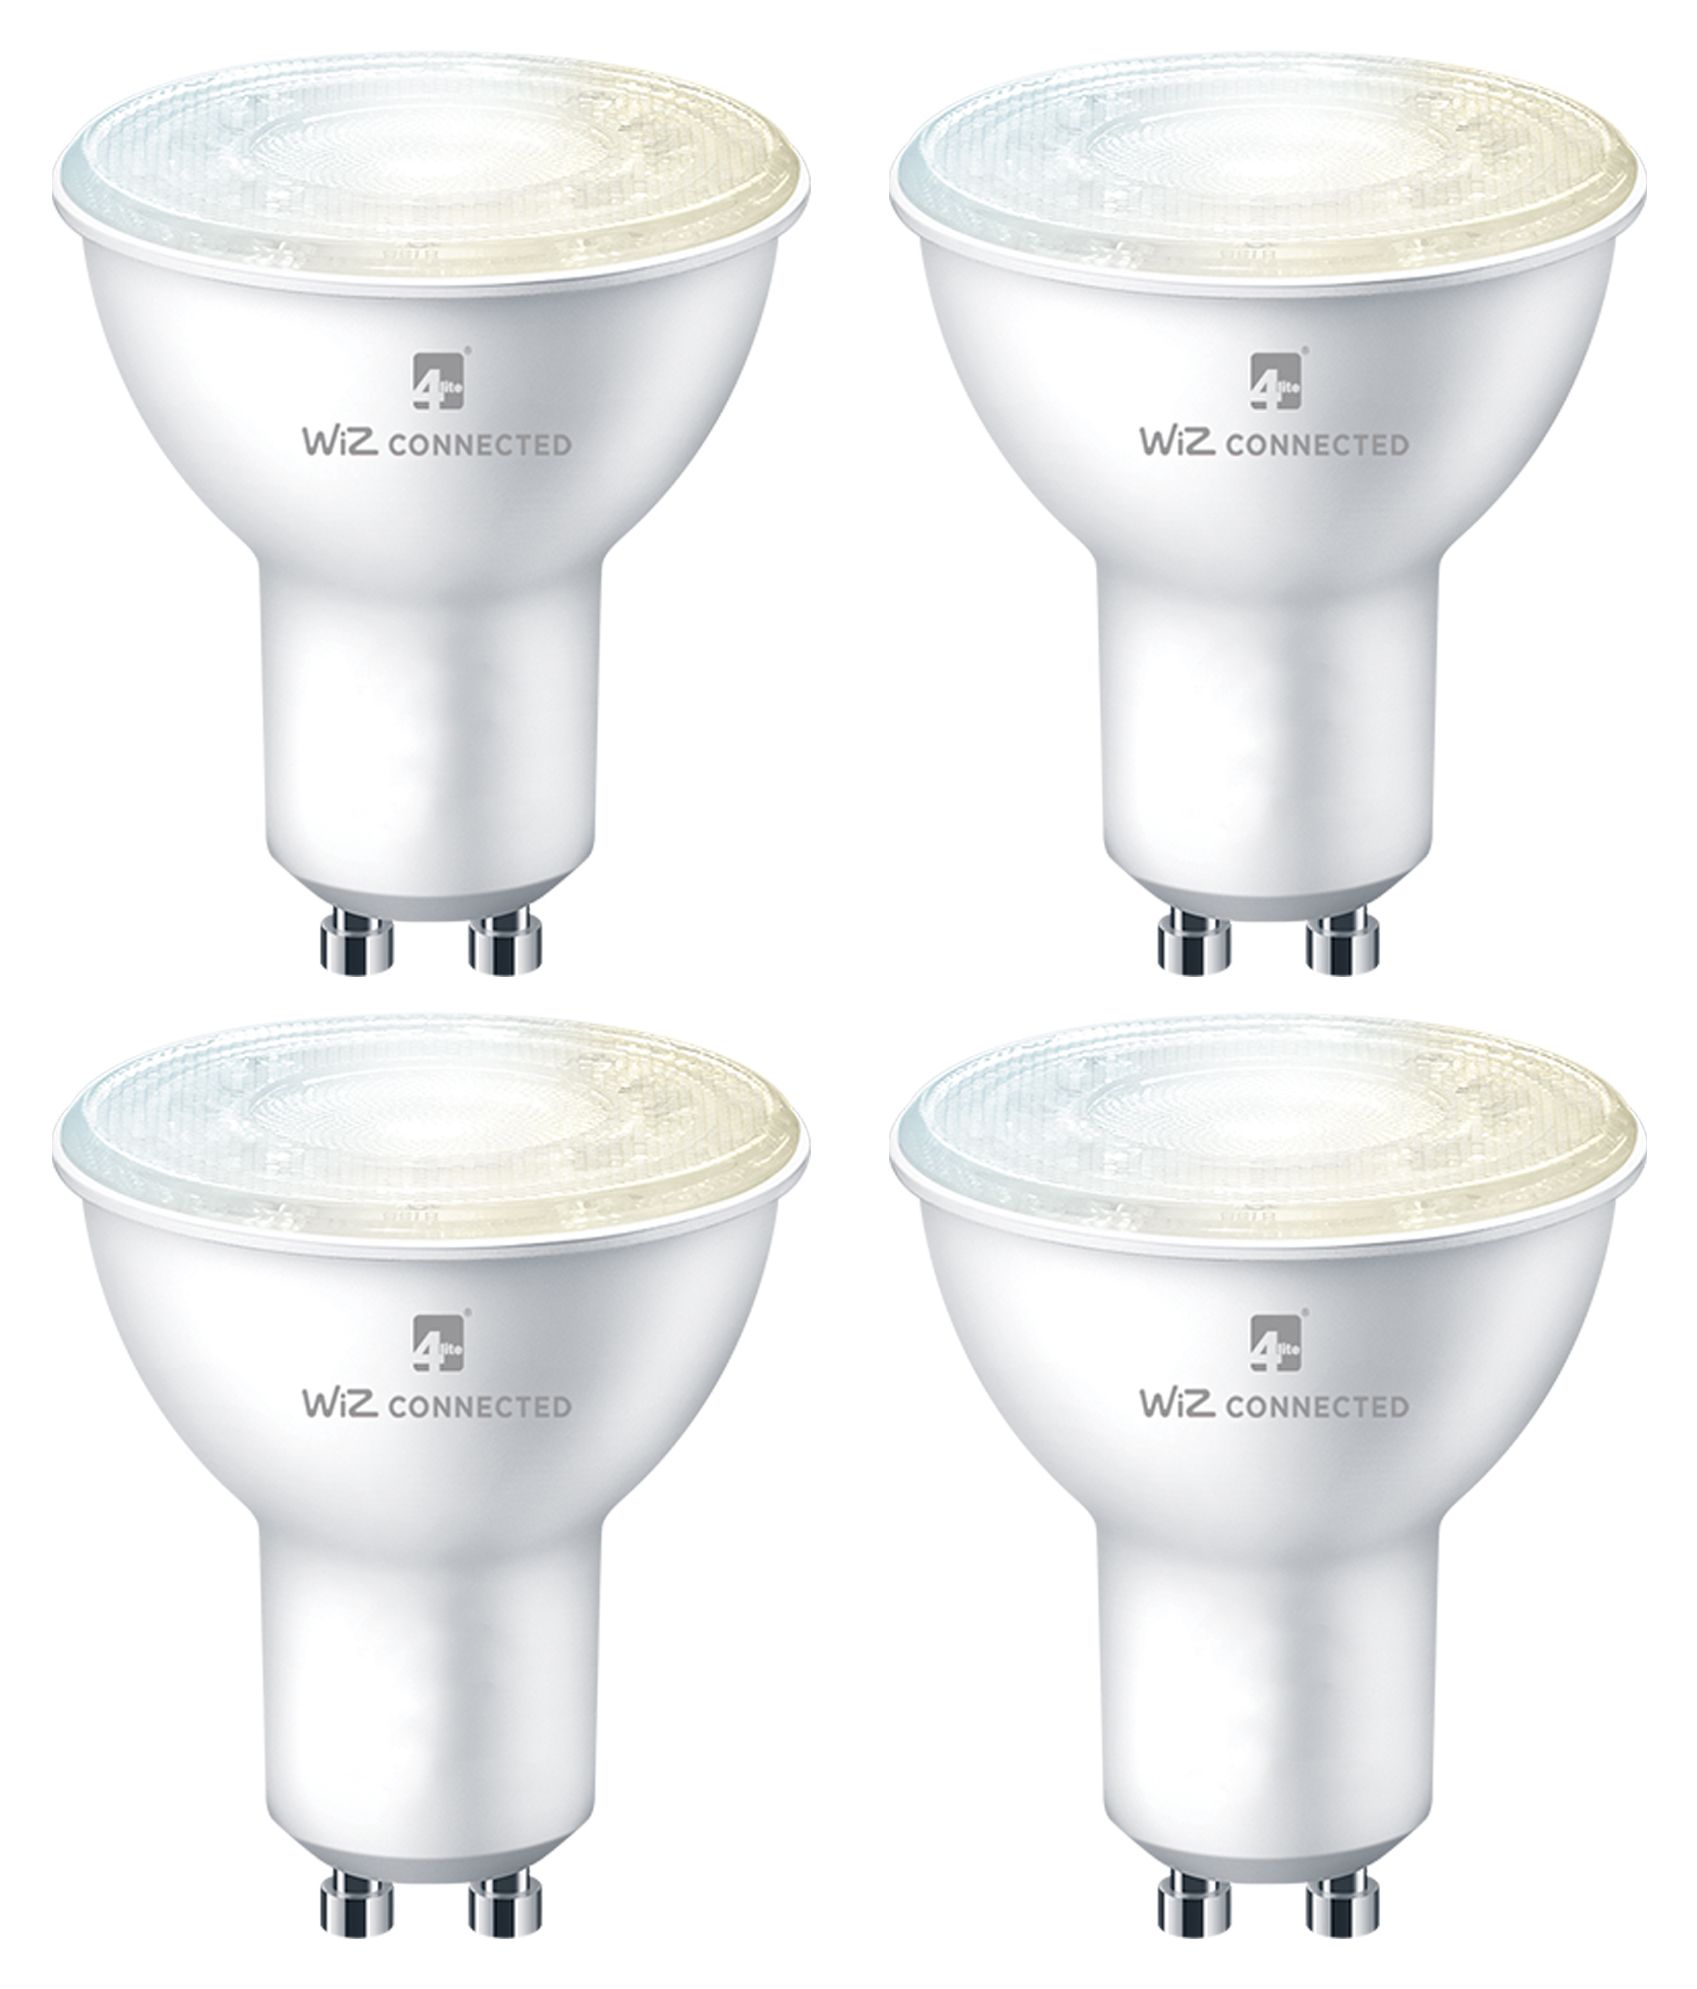 Image of 4lite WiZ Connected LED SMART GU10 Light Bulbs - Tuneable White - Pack of 4